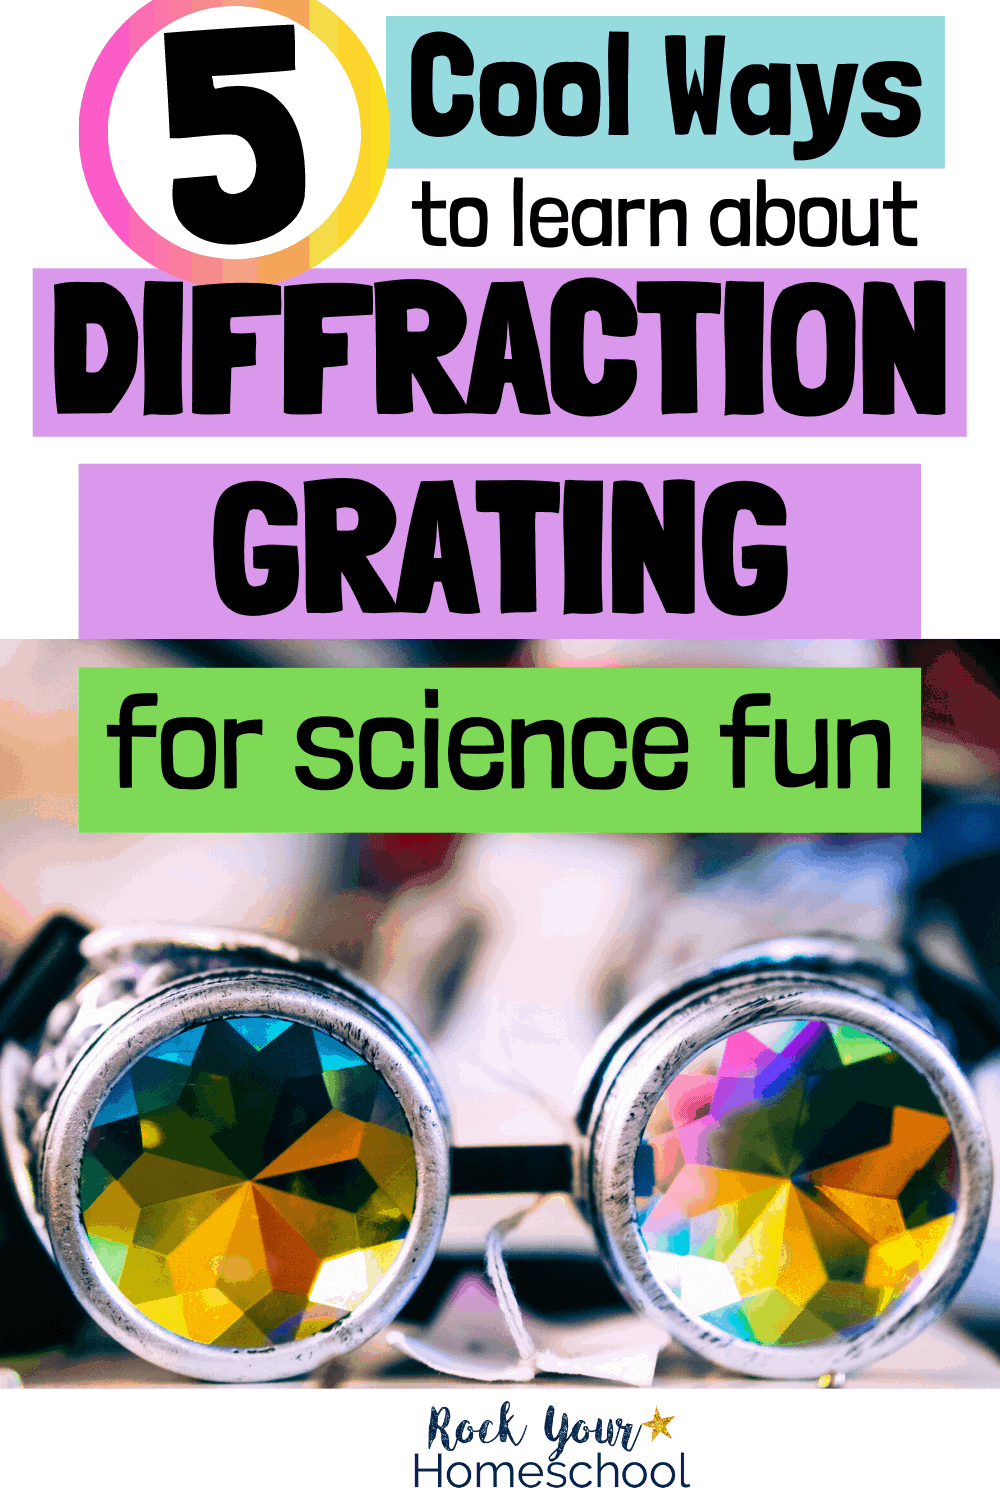 5 Cool Ways to Learn About Diffraction Grating for Science Fun